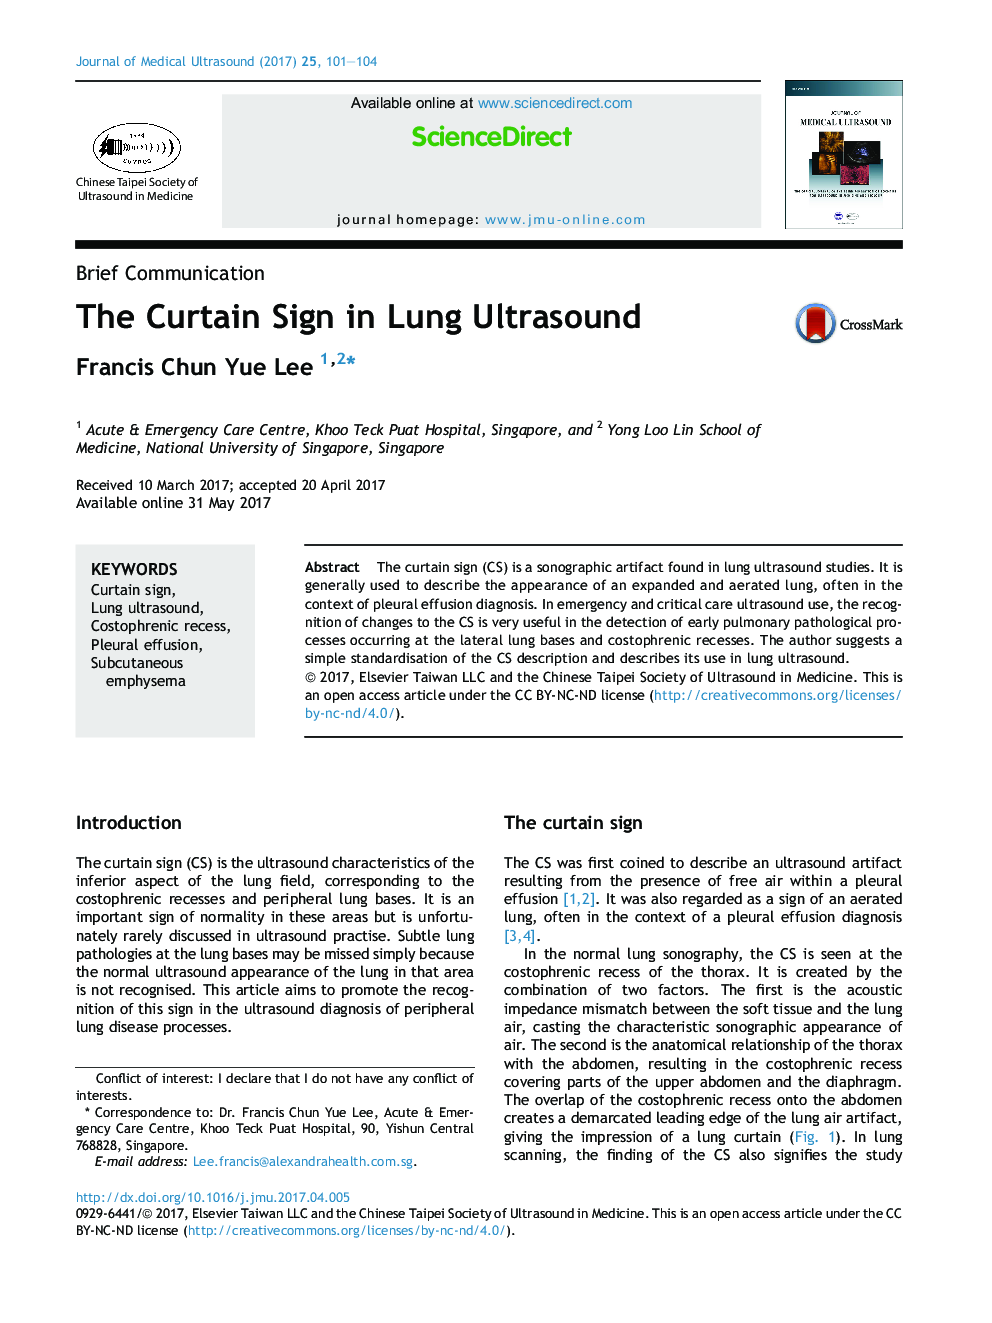 The Curtain Sign in Lung Ultrasound